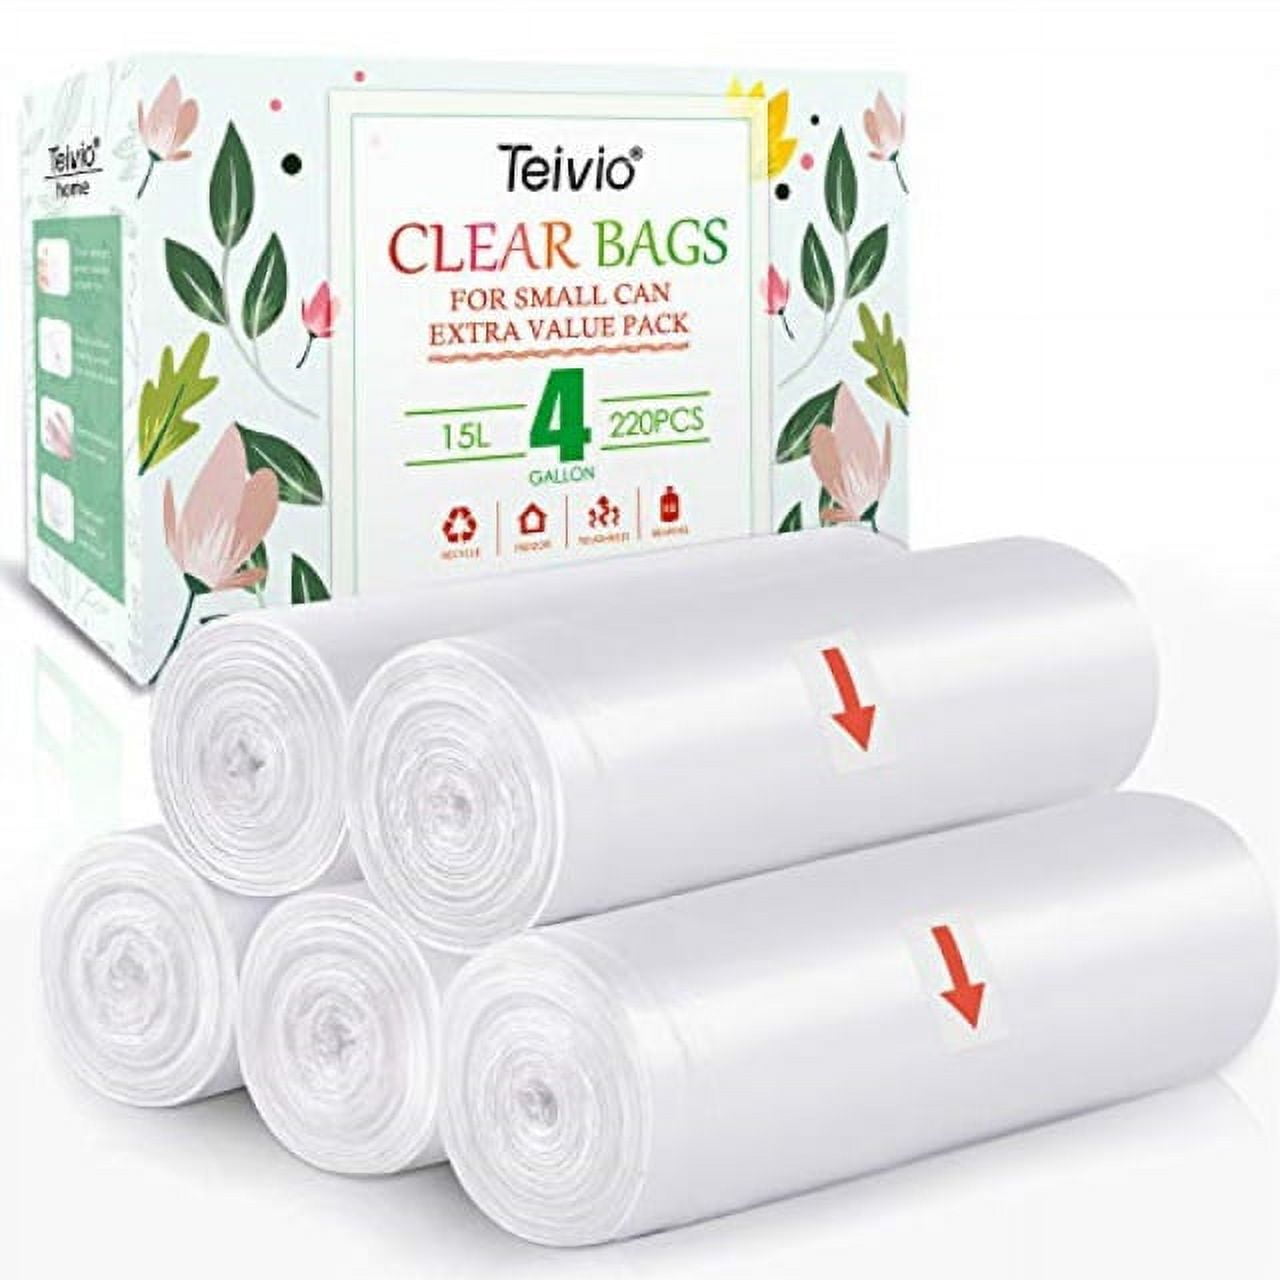 Hercules 4 gallon trash bags - 100 clear garbage bags for bathroom, office,  or bedroom waste bin by upper midland products